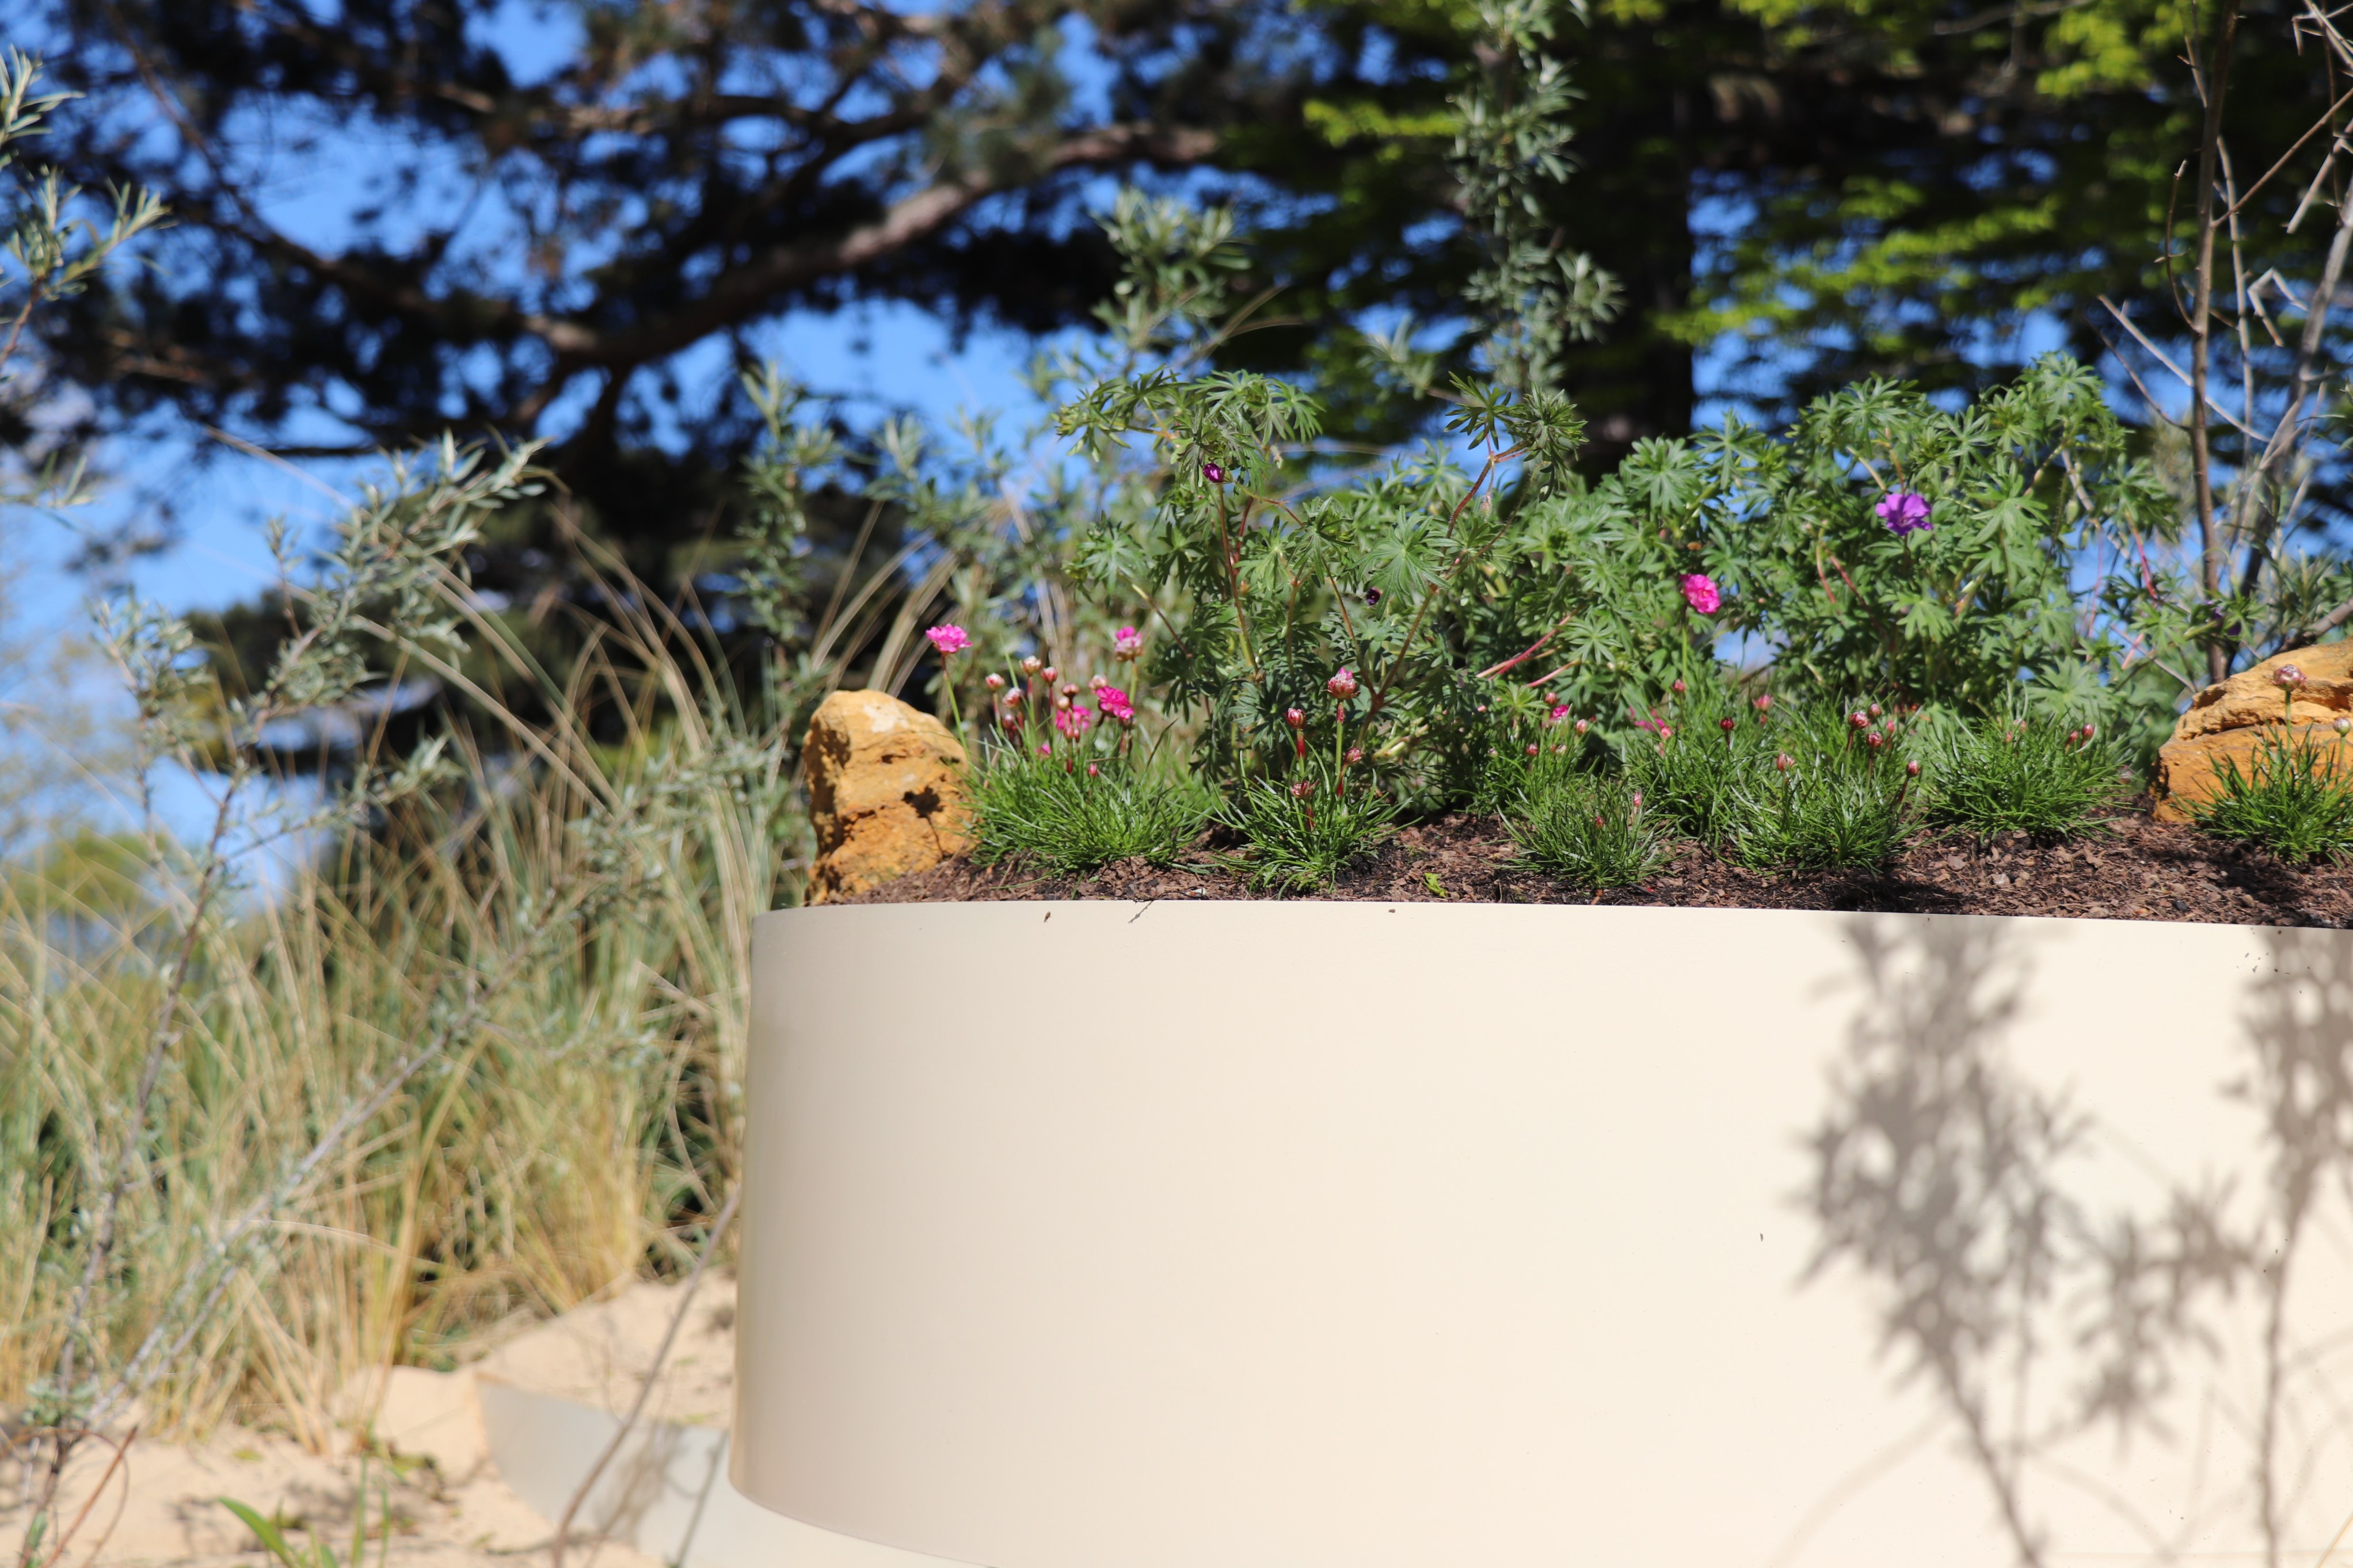 A glimpse of the plantlife in the sand dune Plantscape installation